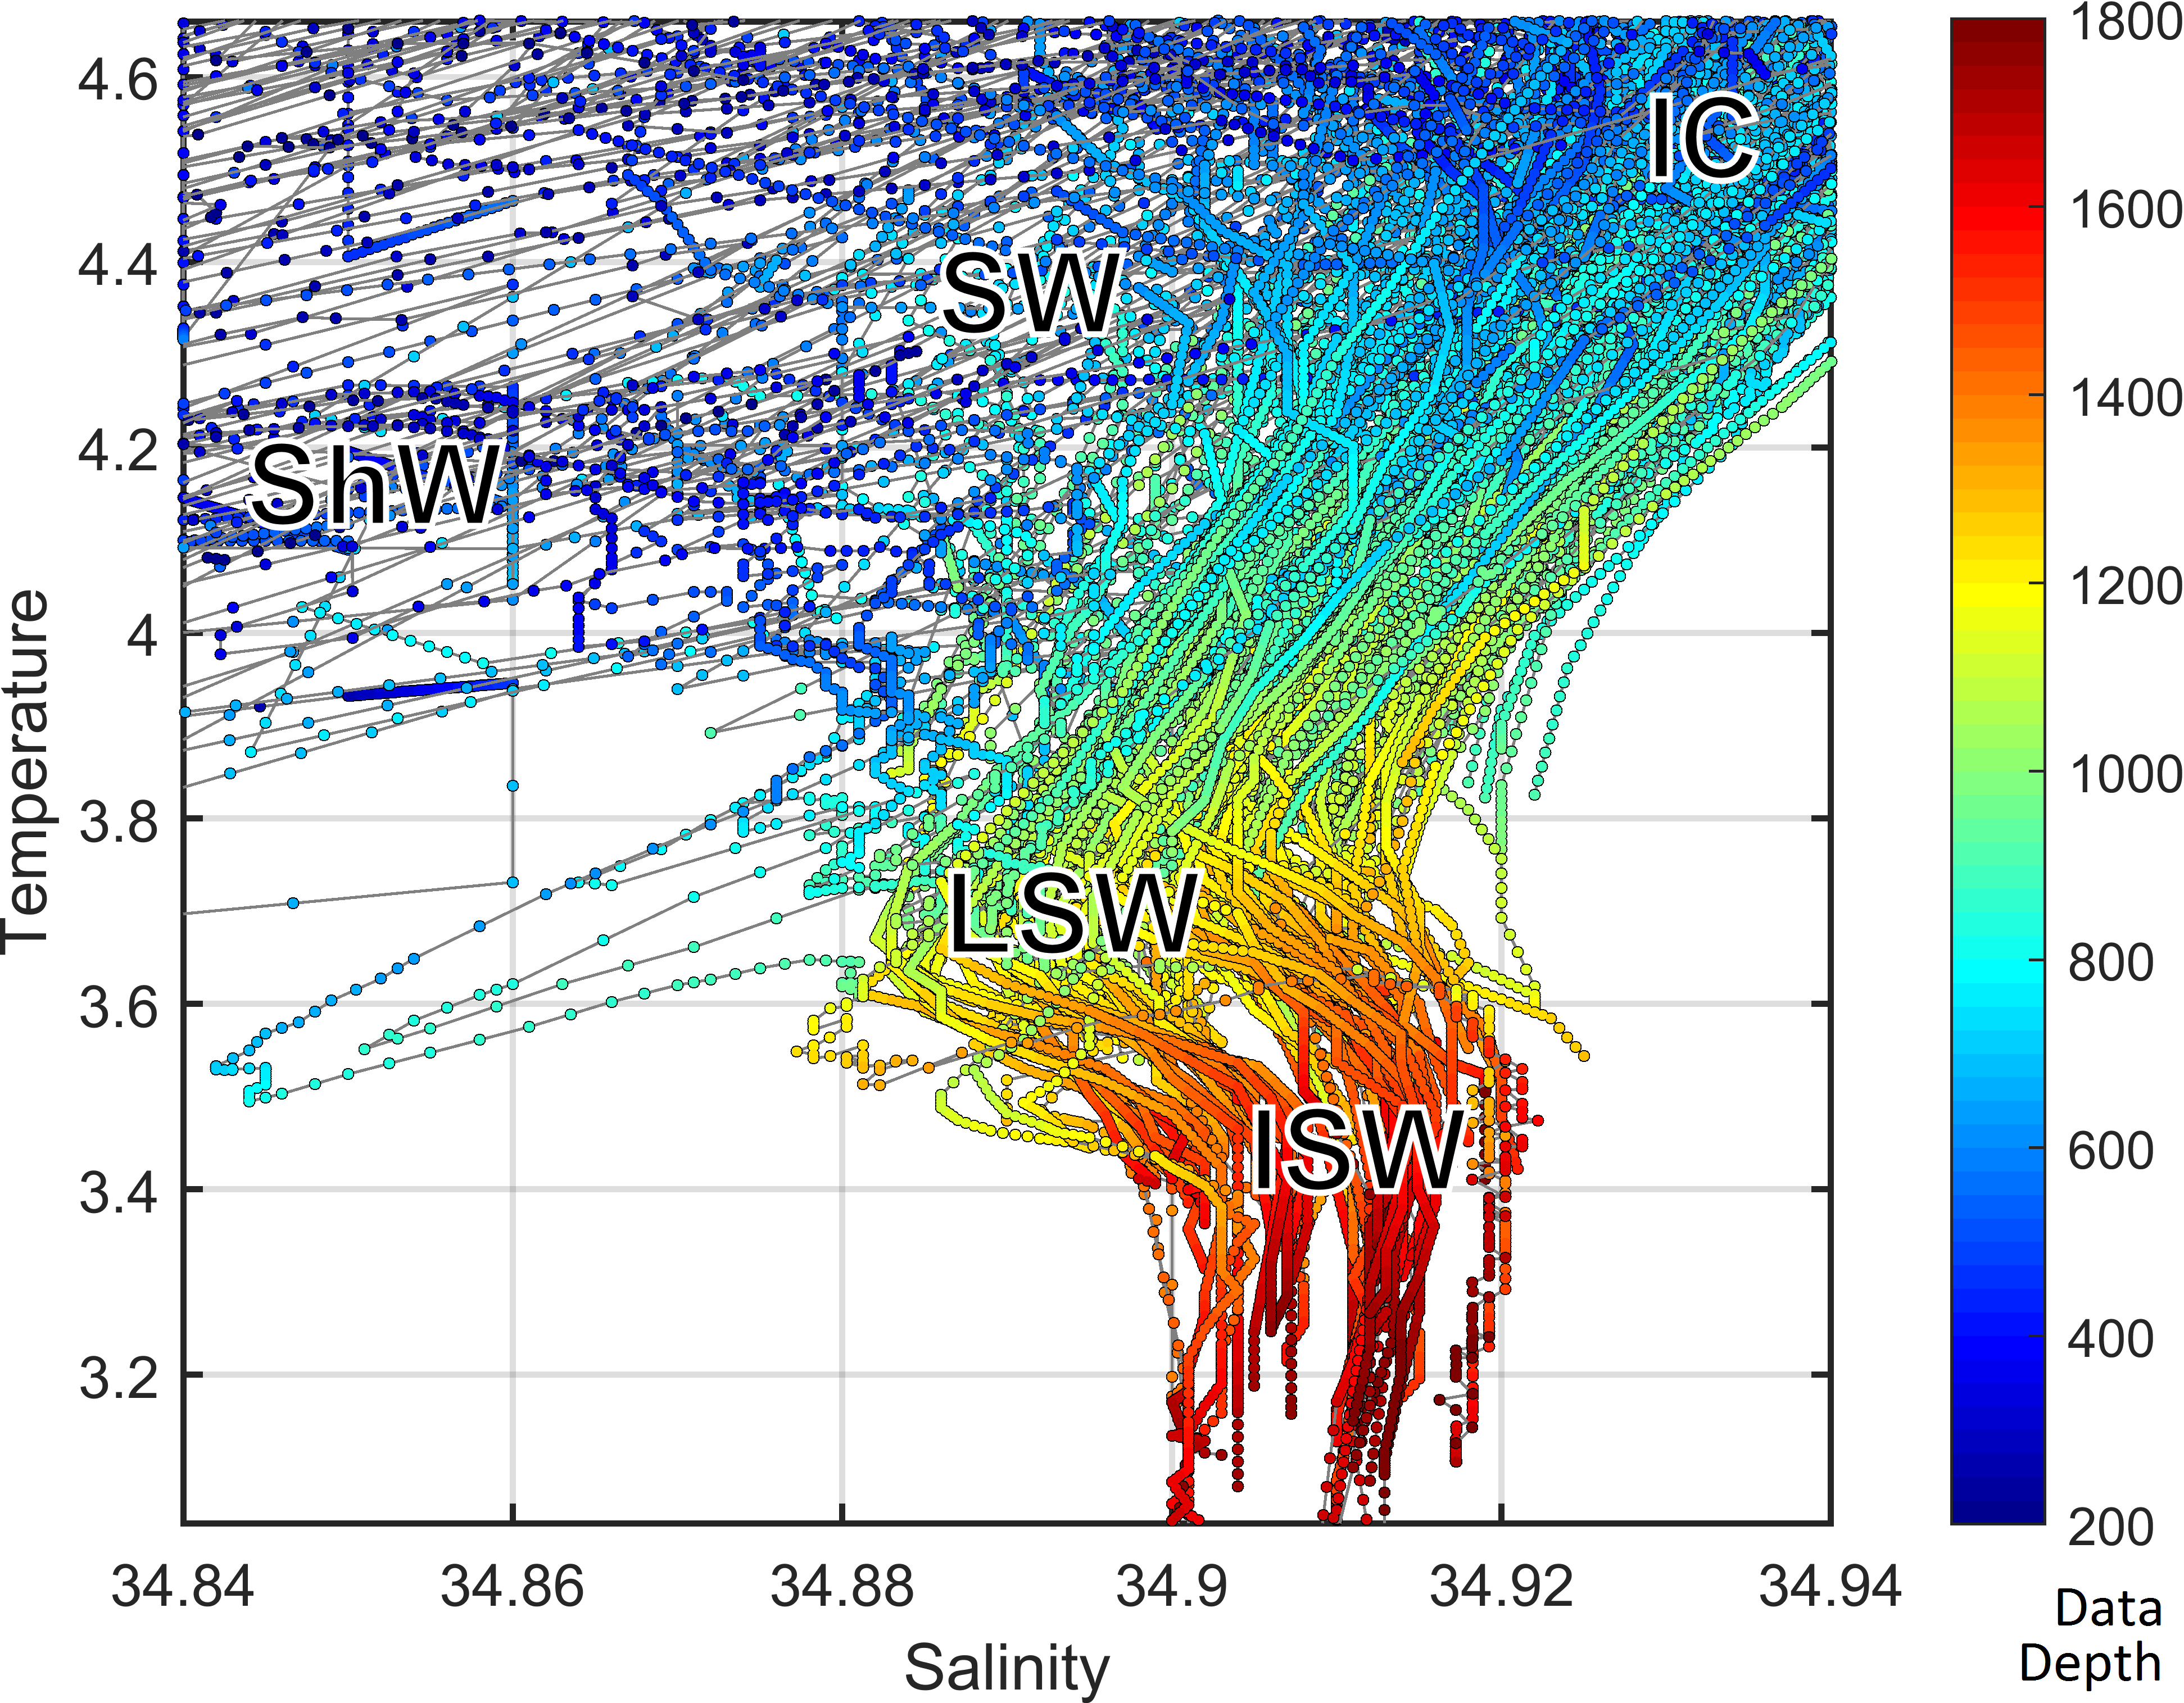 Temperature and salinity (T-S) plot showing the different water masses in the Davis strait by depth: Shelf Water (ShW), Slope Water (SW), Irminger Current (IC), Labrador Sea Water (LSW), and Icelandic slope water (ISW). Analysis and figure contributed by Igor Yashayaev.